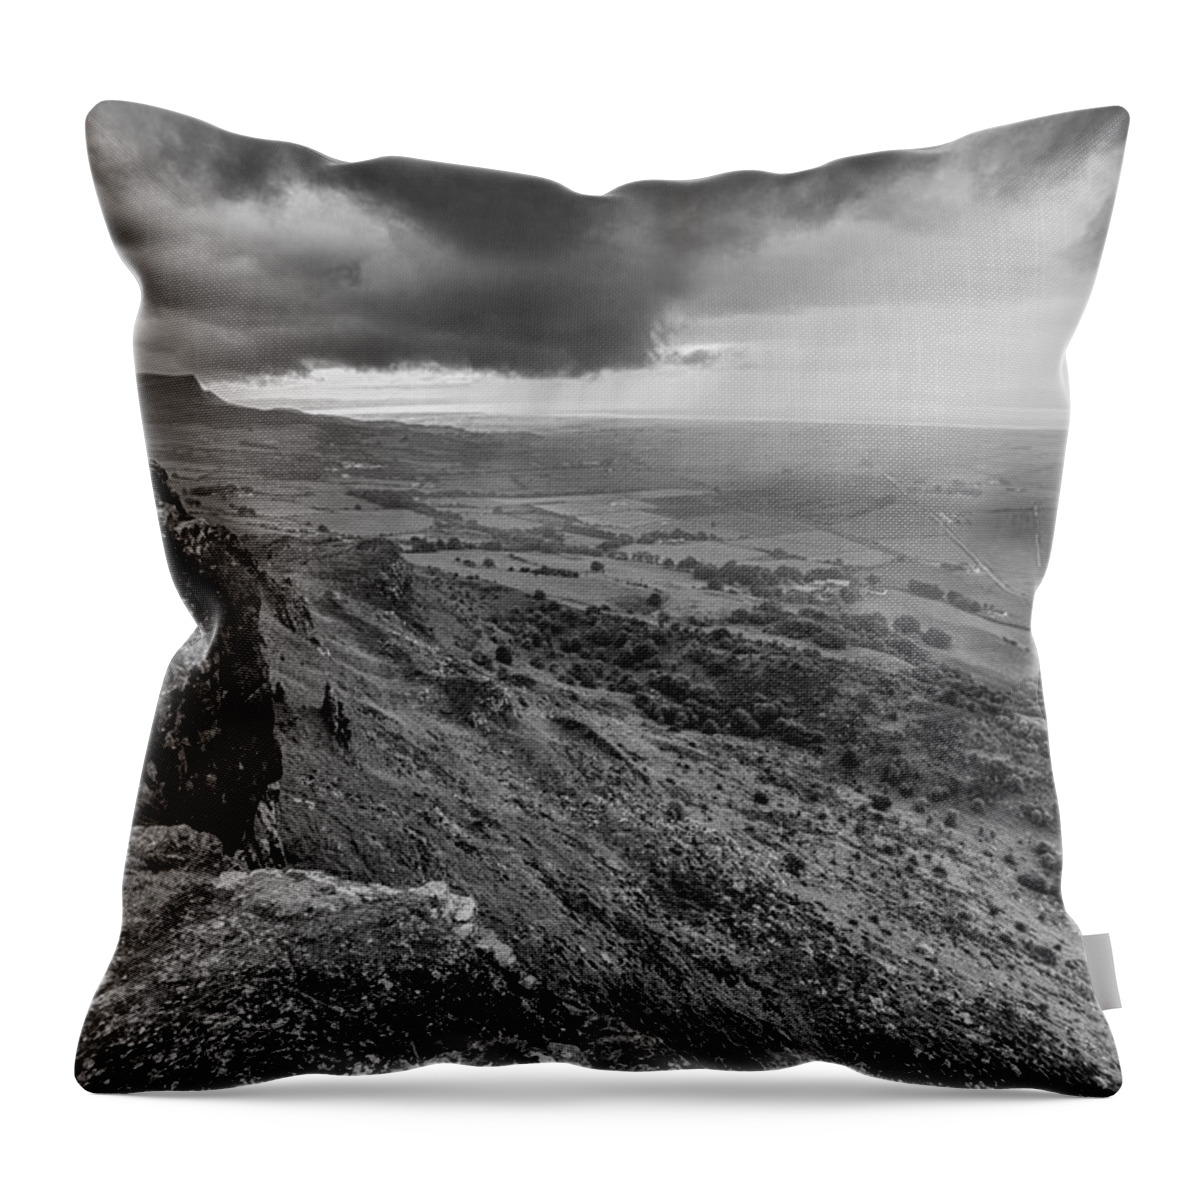 Binevenagh Throw Pillow featuring the photograph Binevenagh Storm Clouds by Nigel R Bell